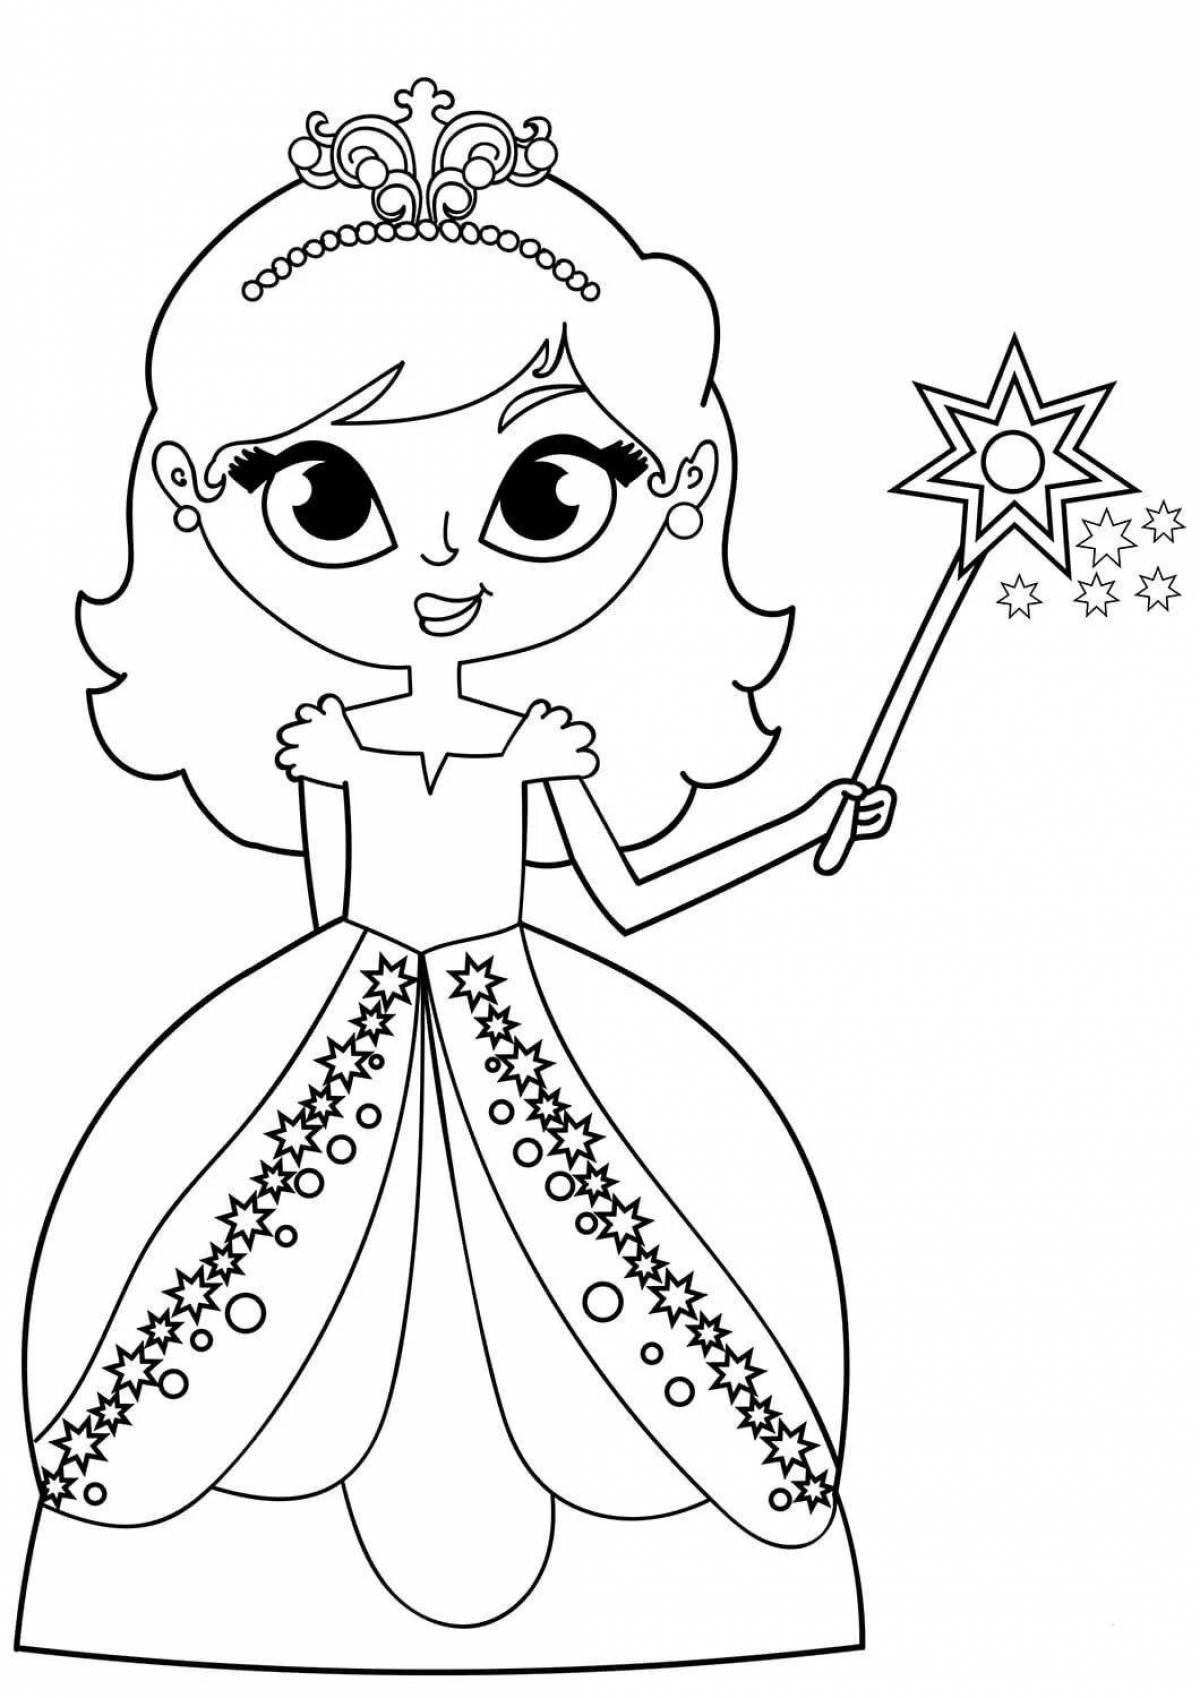 Great princess coloring book for girls 4-5 years old